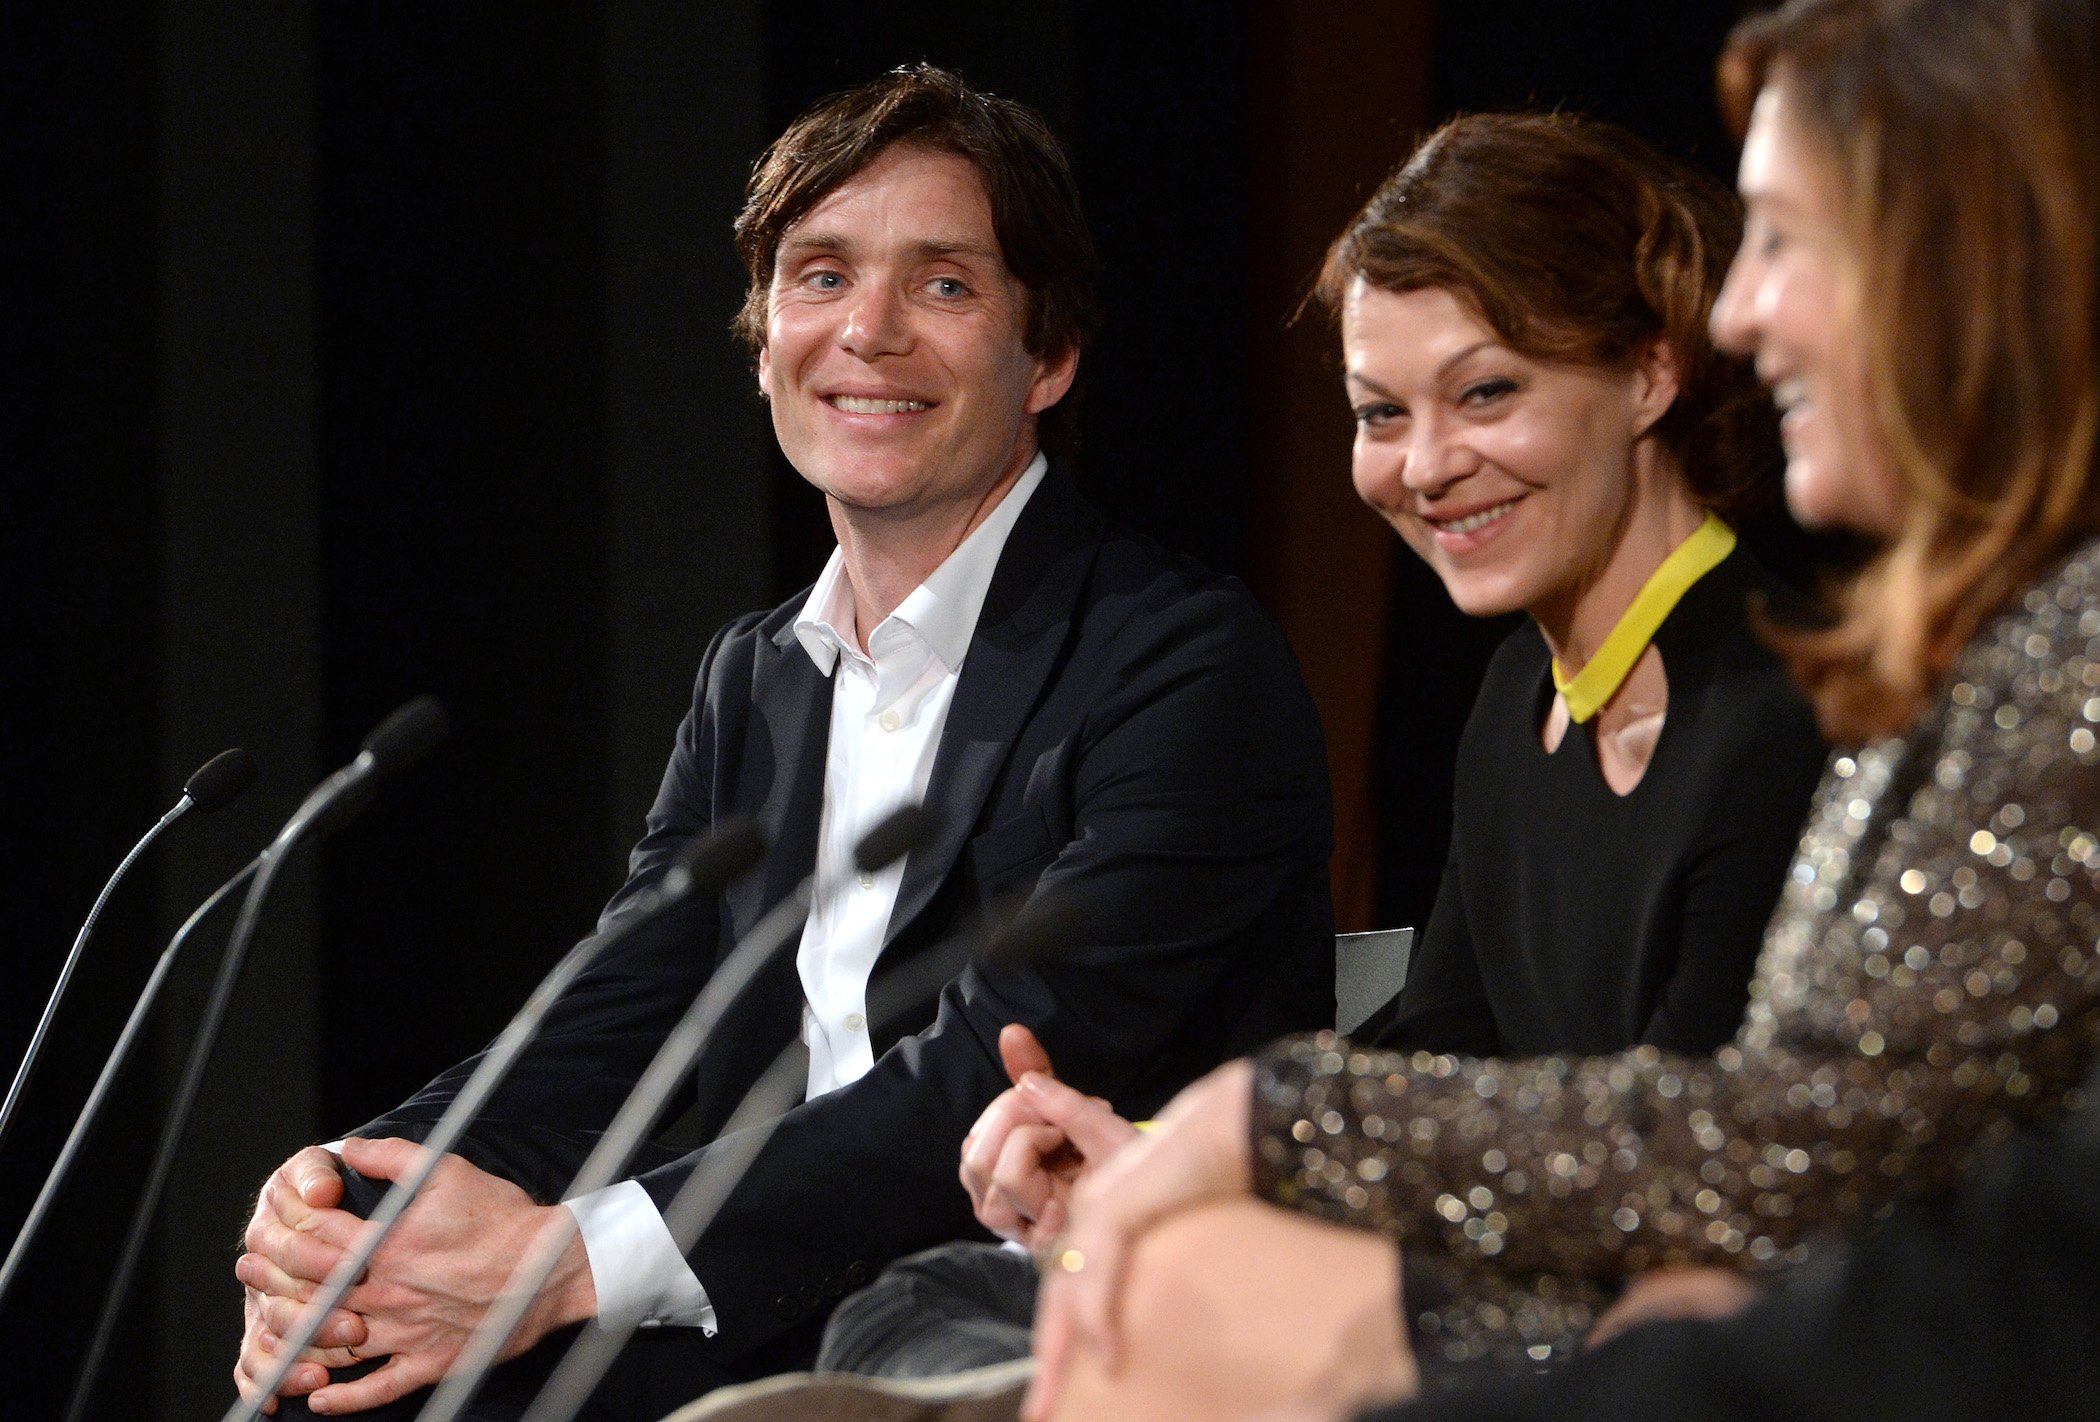 Cillian Murphy from 'Peaky Blinders' Season 6 and Helen McCrory smiling and sitting next to each other against a dark background